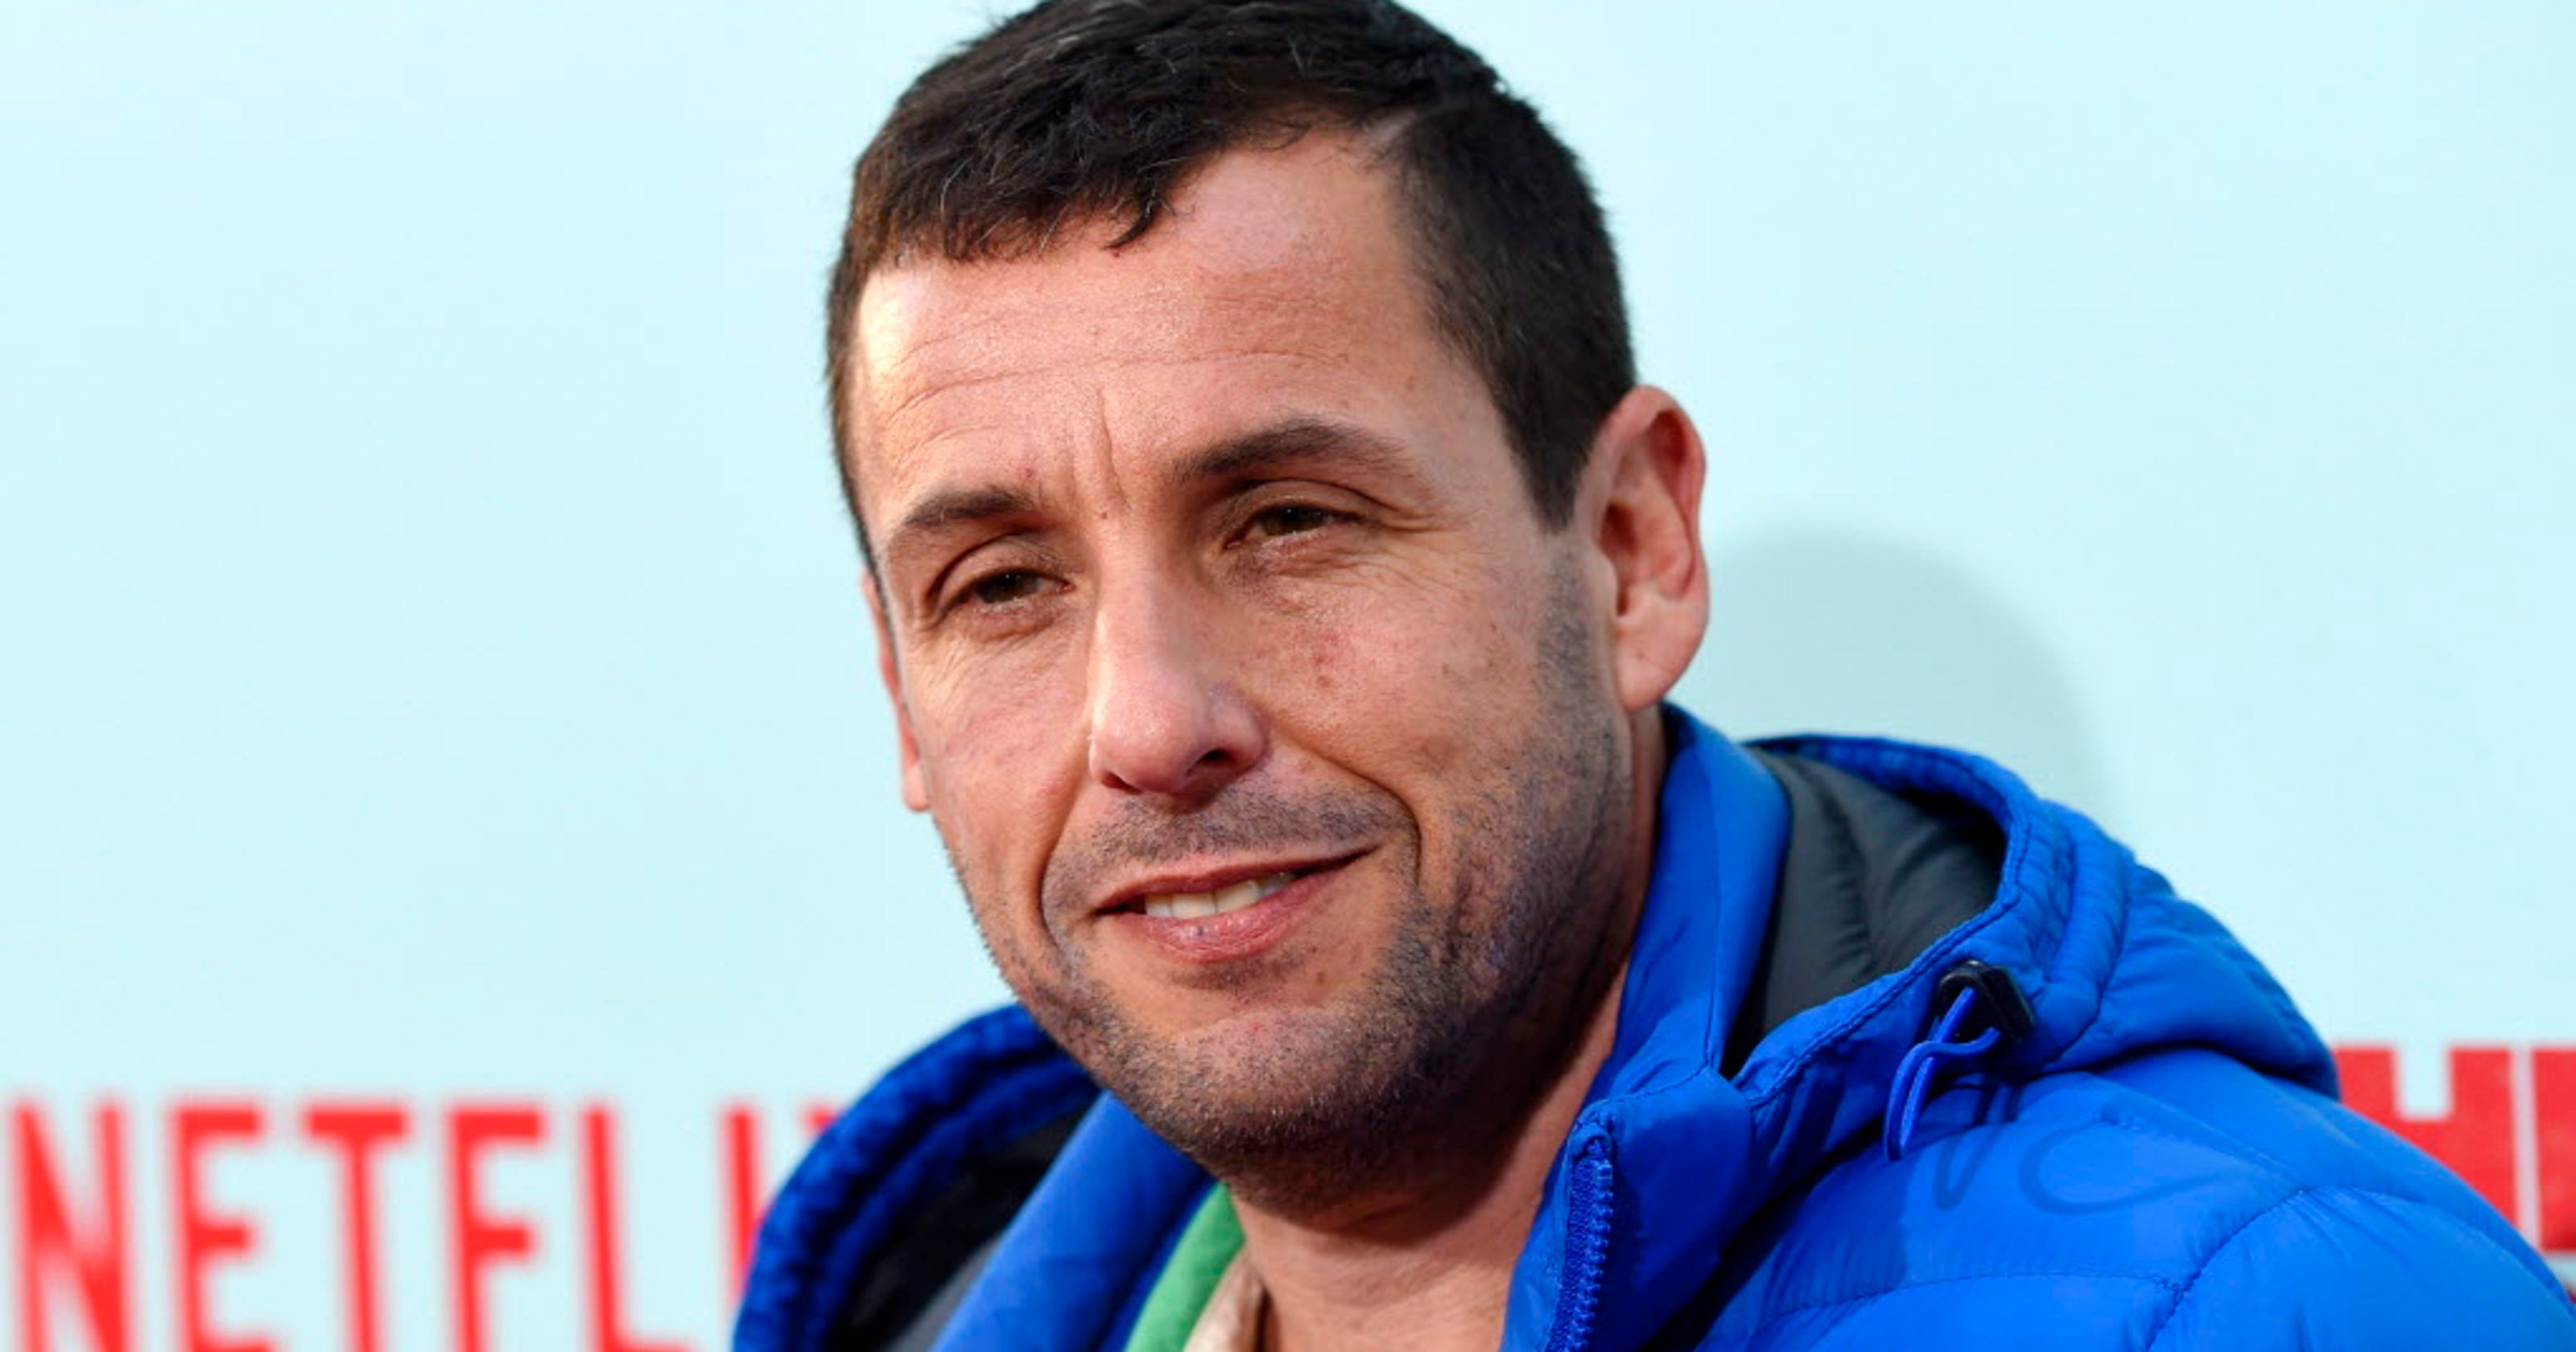 Adam Sandler just filmed his Netflix special. Here's what to expect.